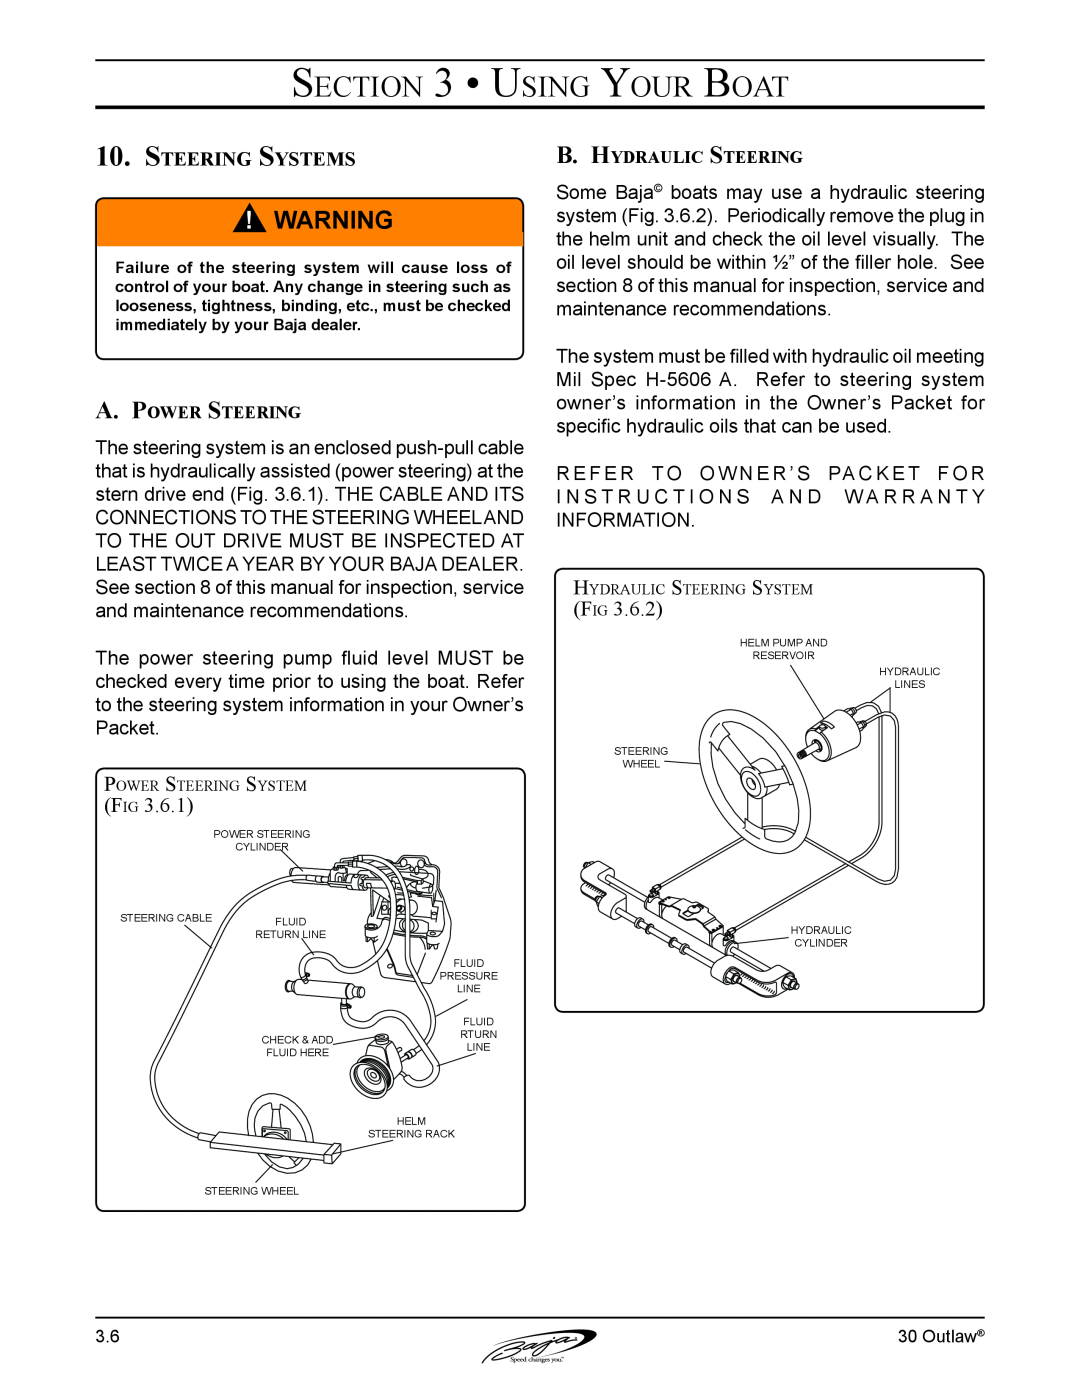 Baja Marine 30 manual Using Your Boat, Steering Systems, A. Power Steering, B. Hydraulic Steering 